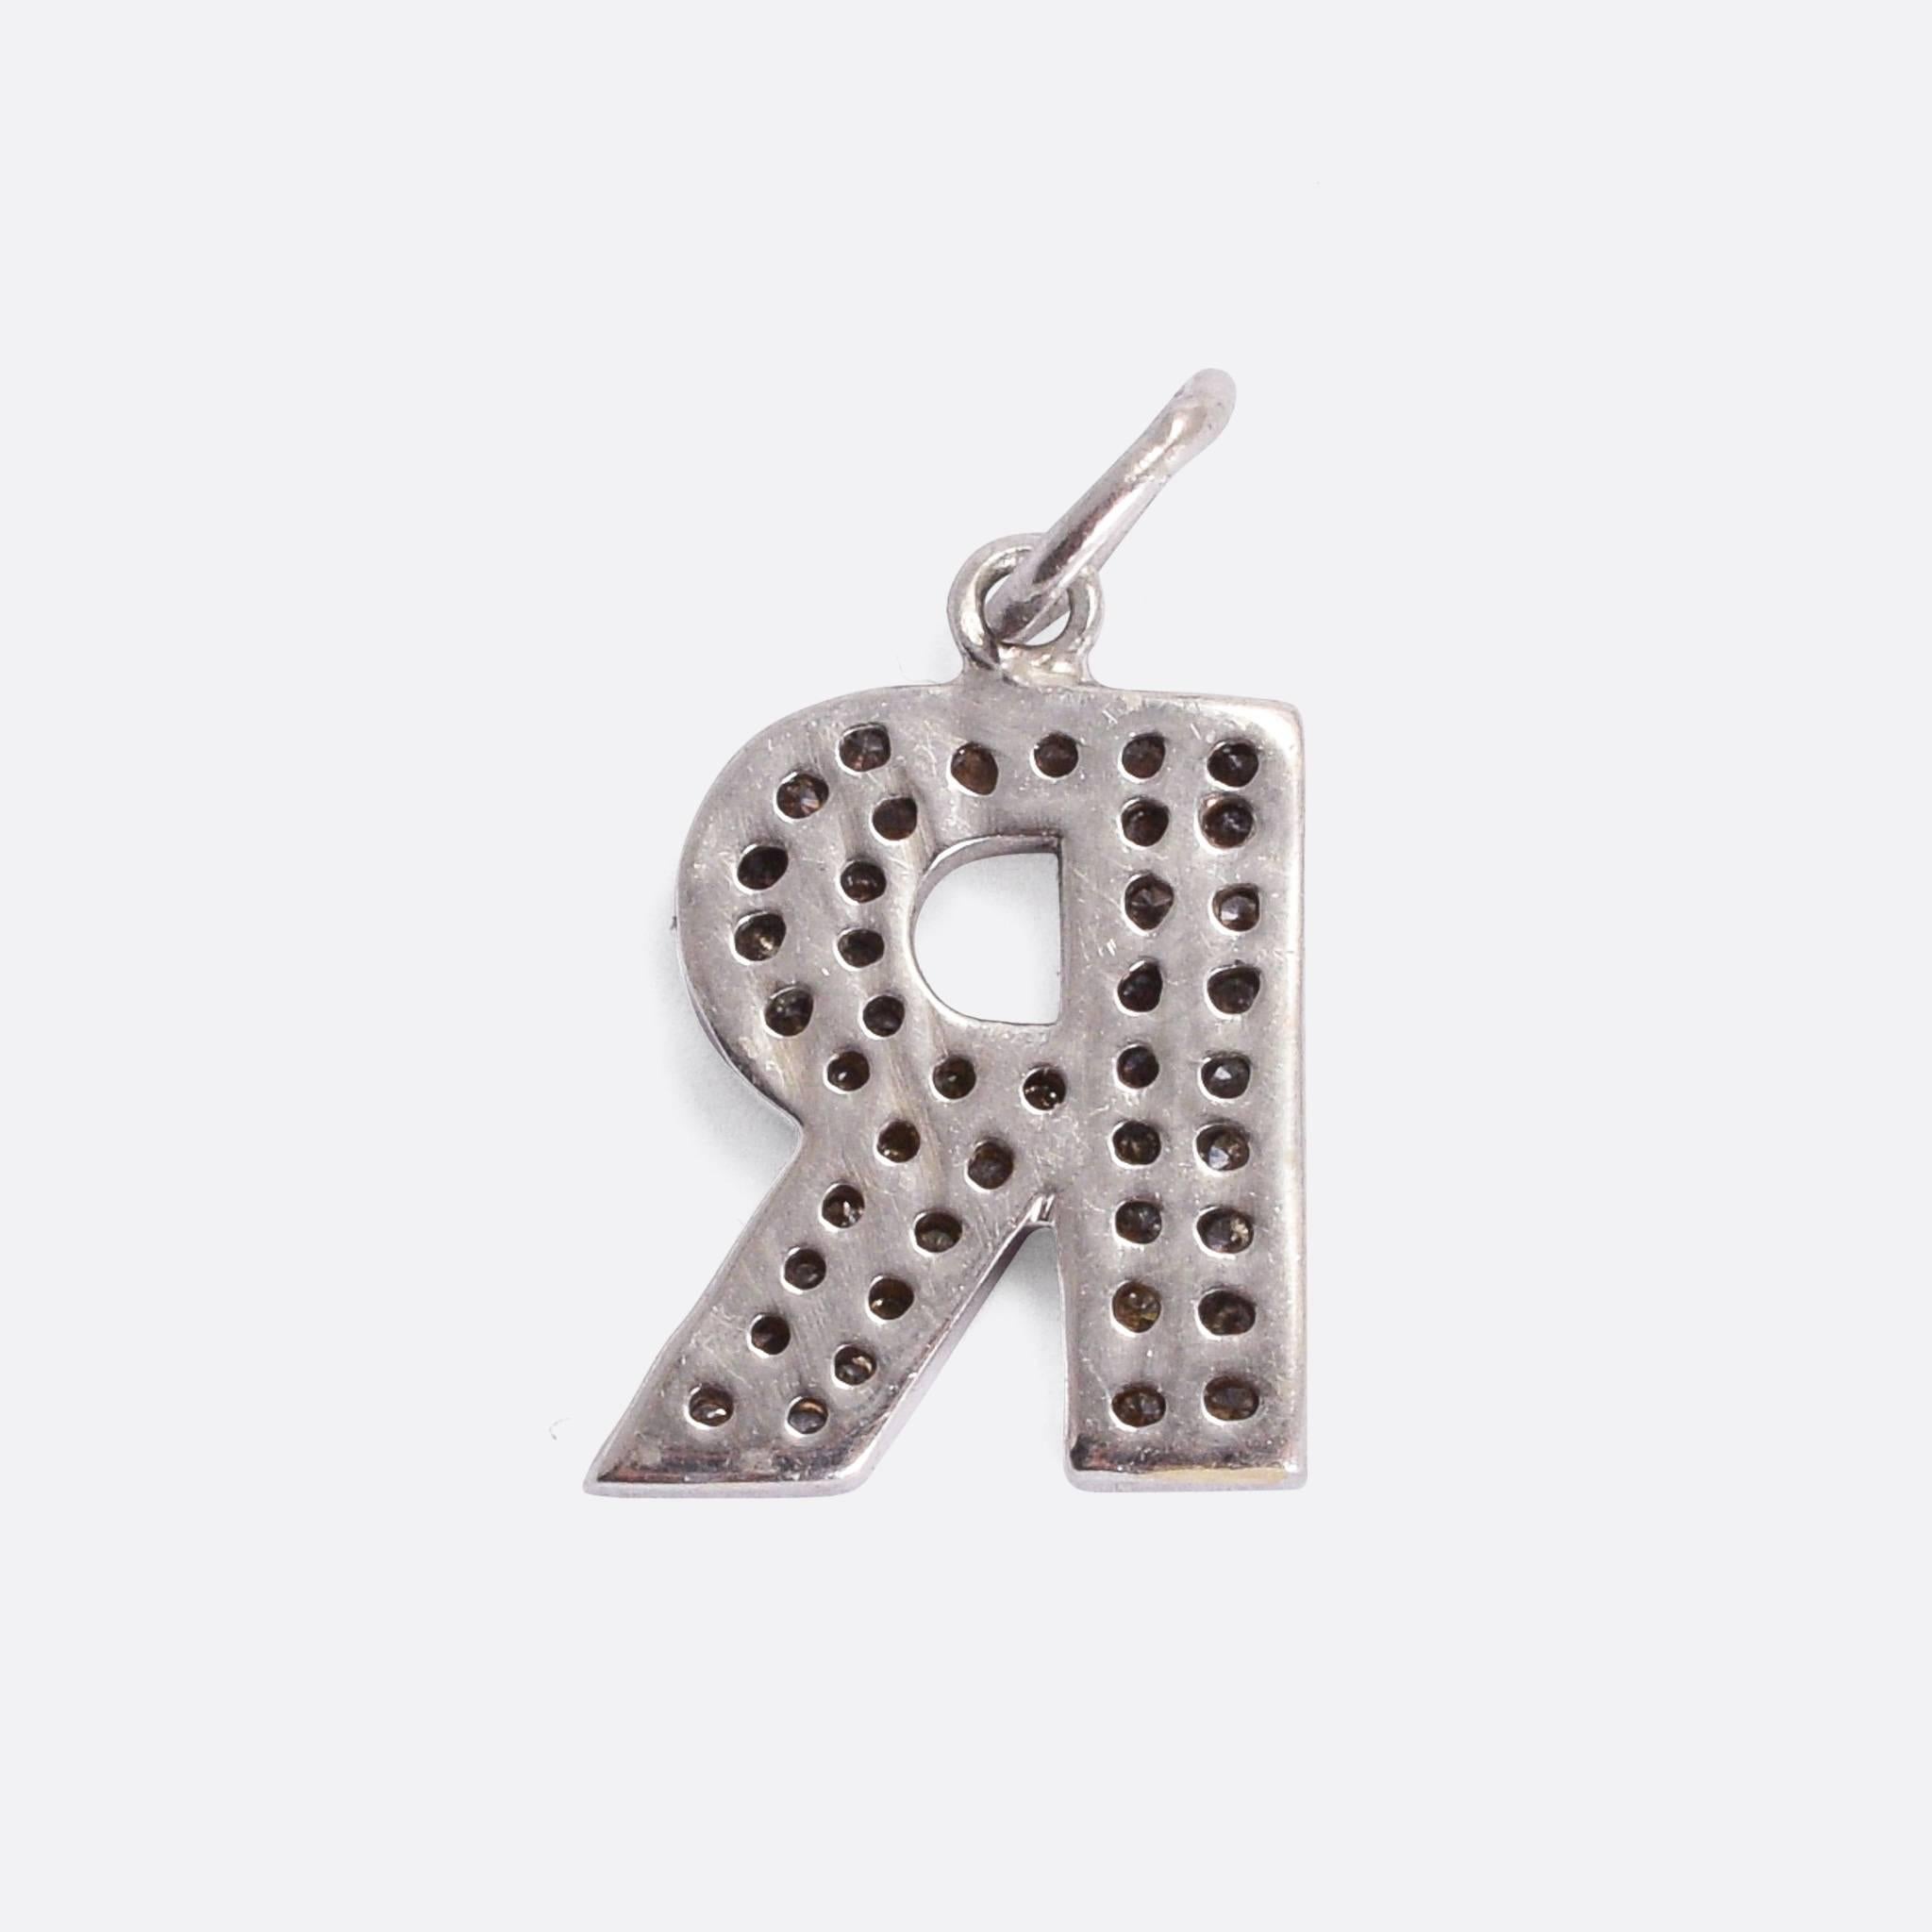 A fine vintage pendant modelled as the initial R, and set with 40 sparkling white diamonds. It's crafted from 18 karat white gold throughout, and looks great worn on a fine chain, or as an addition to your charm bracelet.

STONES
40 white diamonds